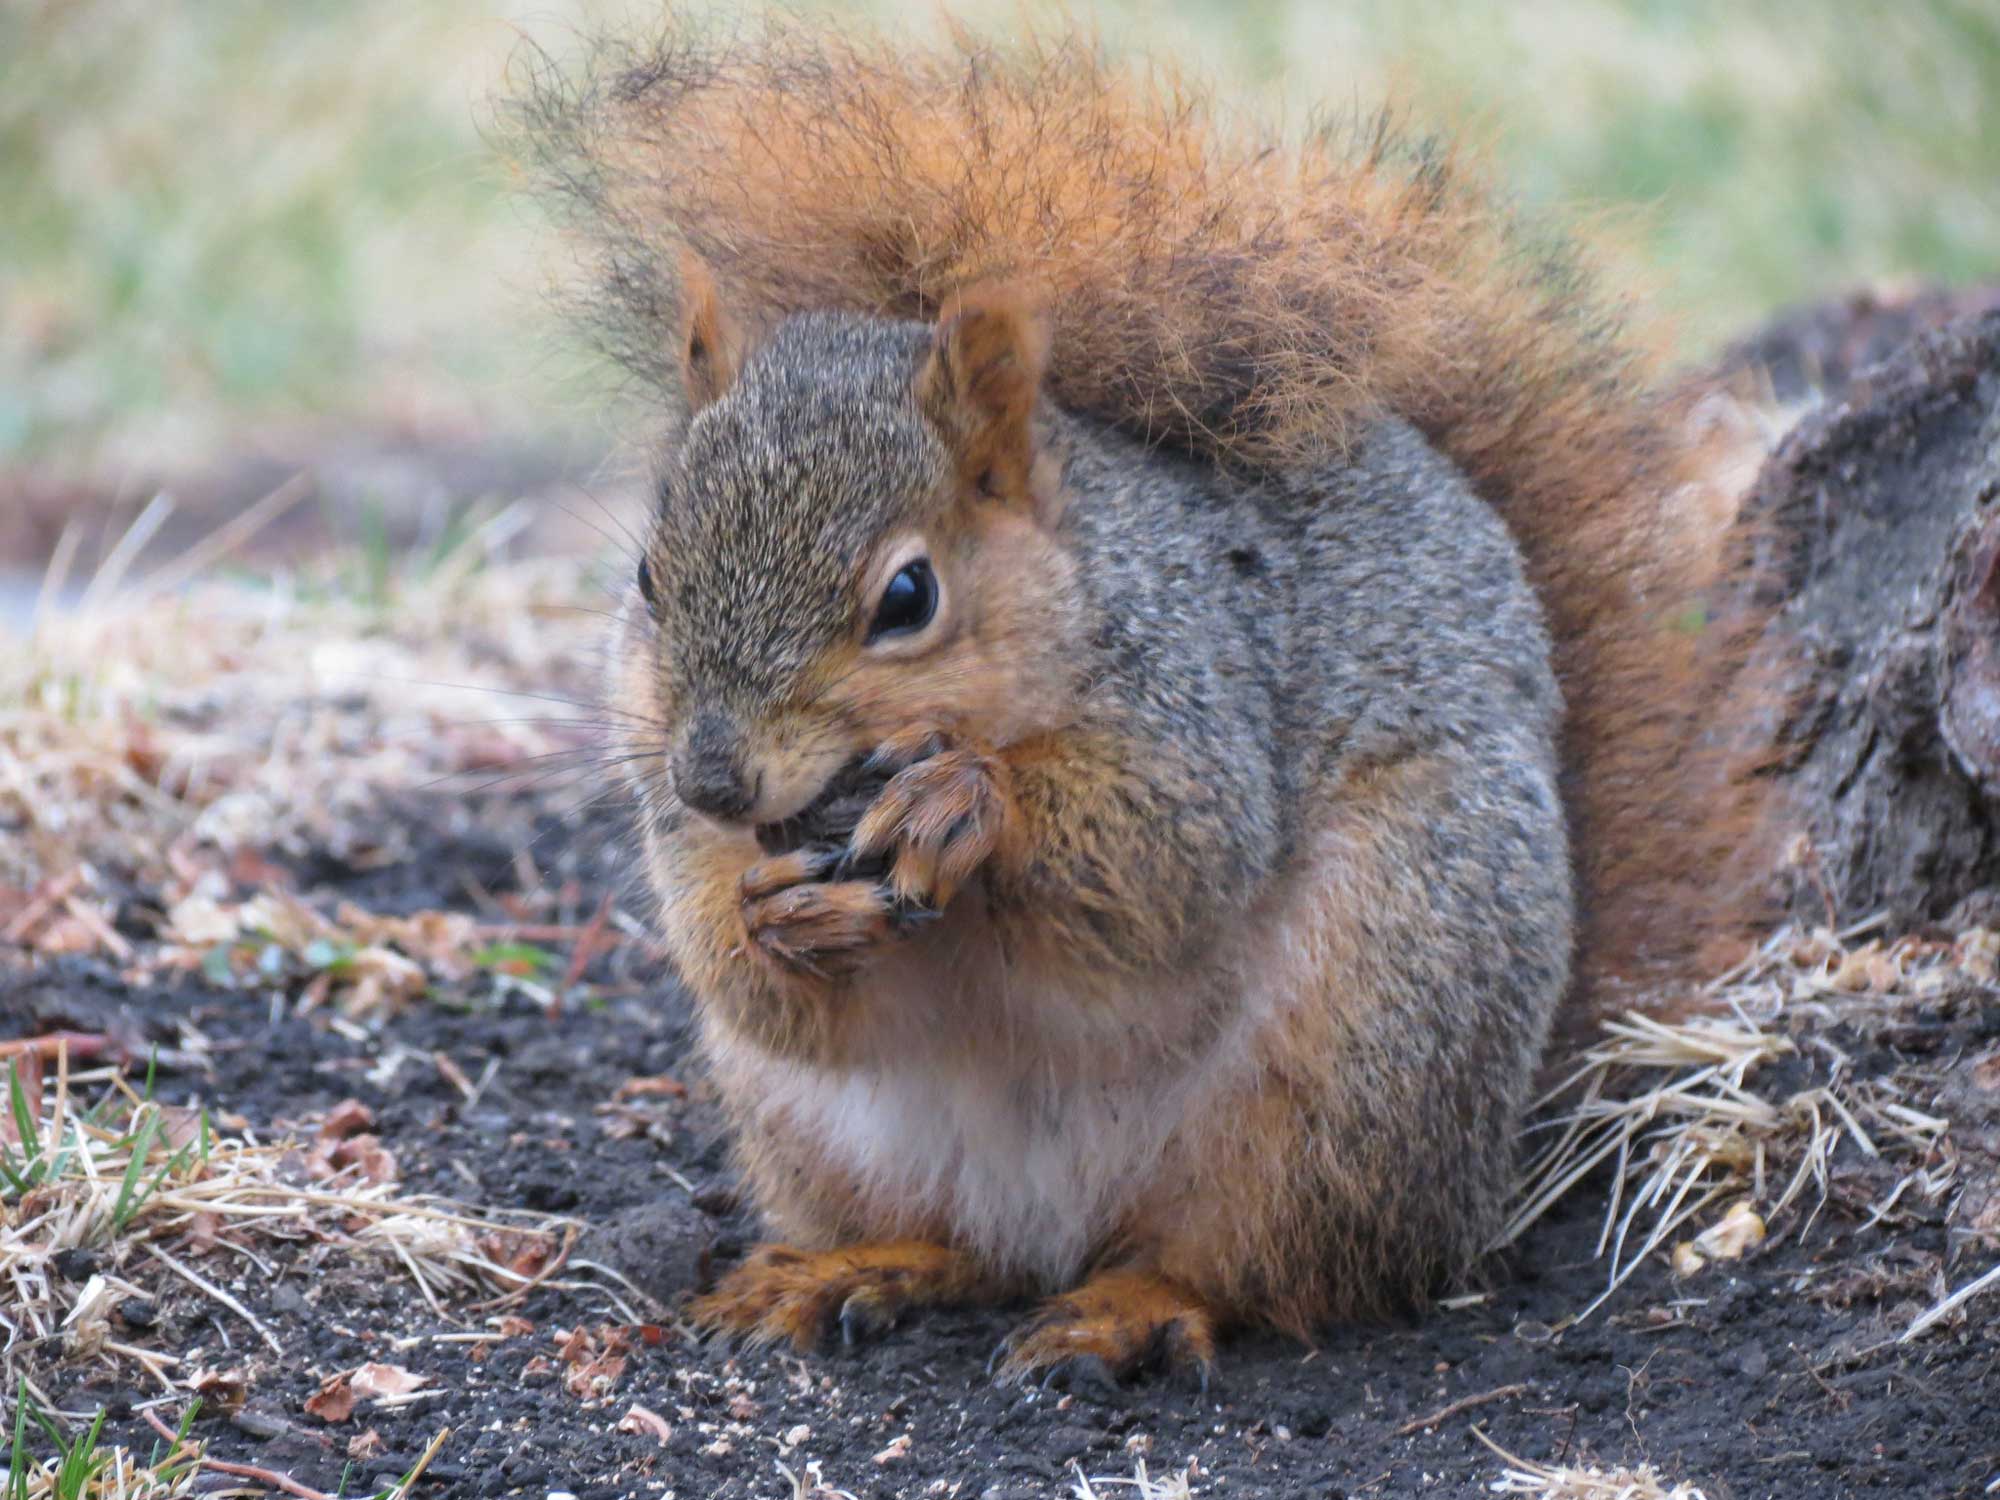 Photograph of a squirrel eating a nut.